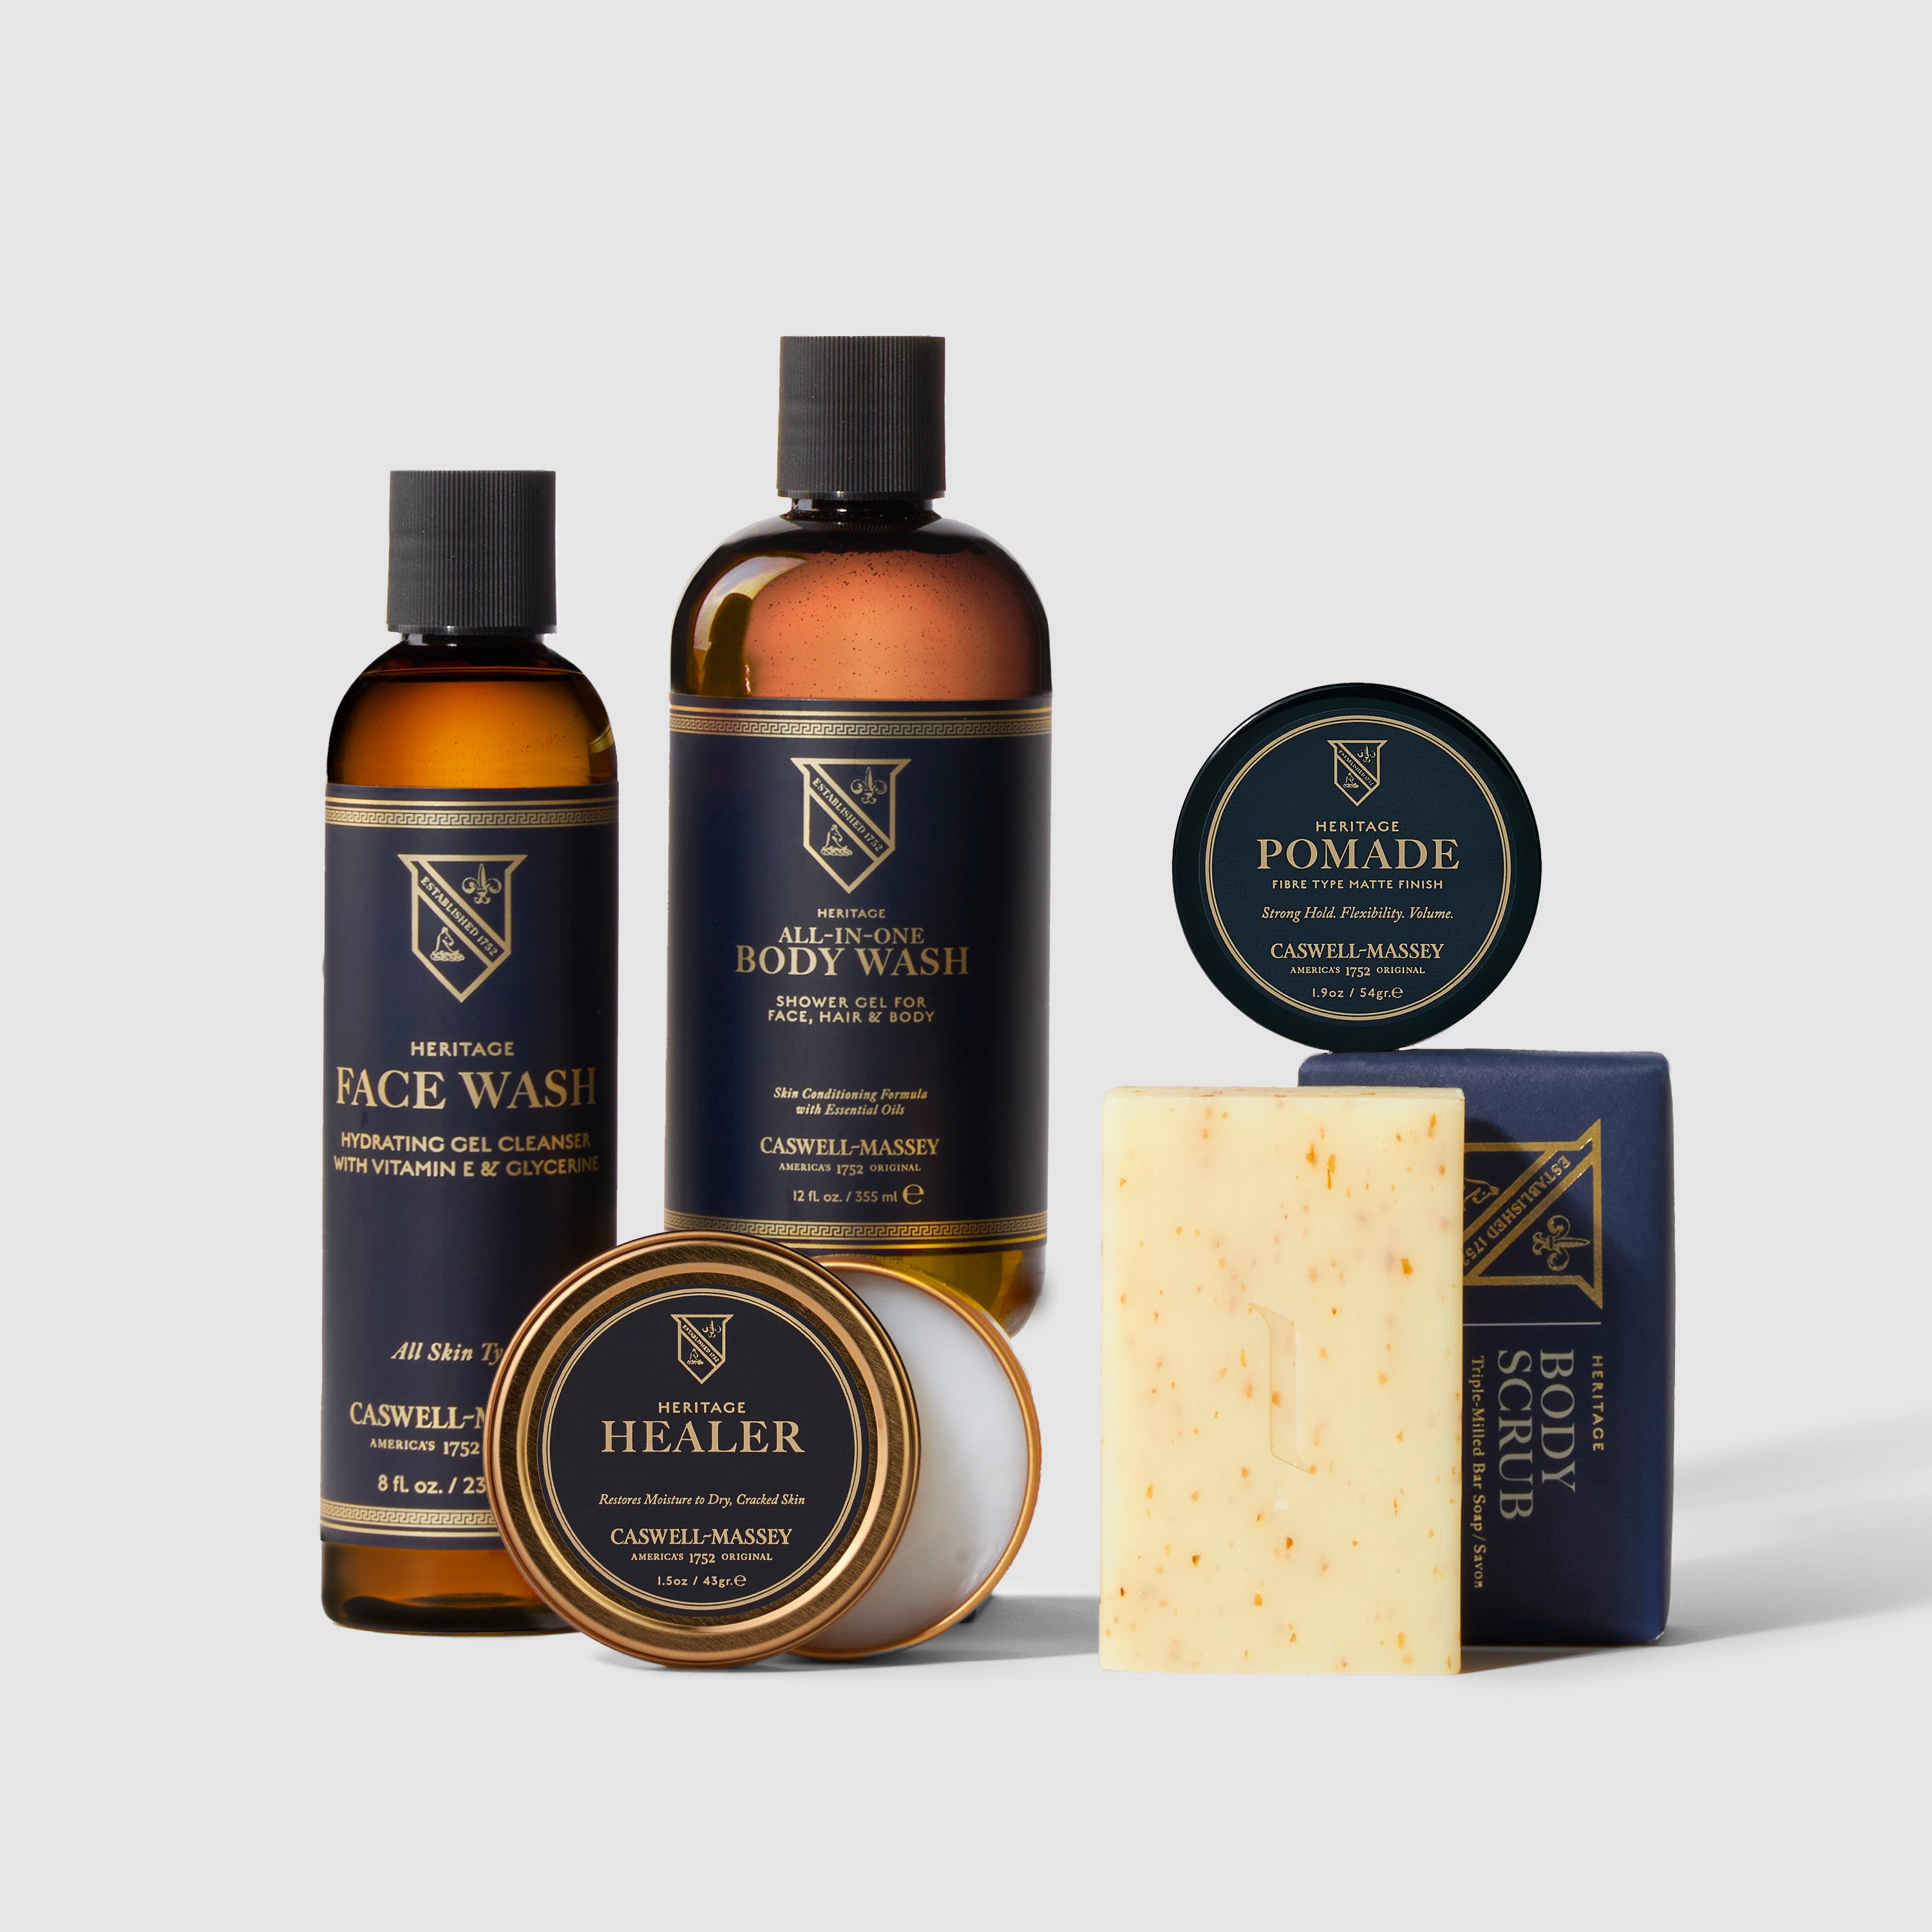 Men's Caswell-Massey Heritage Grooming Gift Set: Body Scrub Soap, Healer Hand Salve, Medium Fiber Hair Pomade, Face Wash, and All-in-One Body Wash included in navy gift box with red ribbon